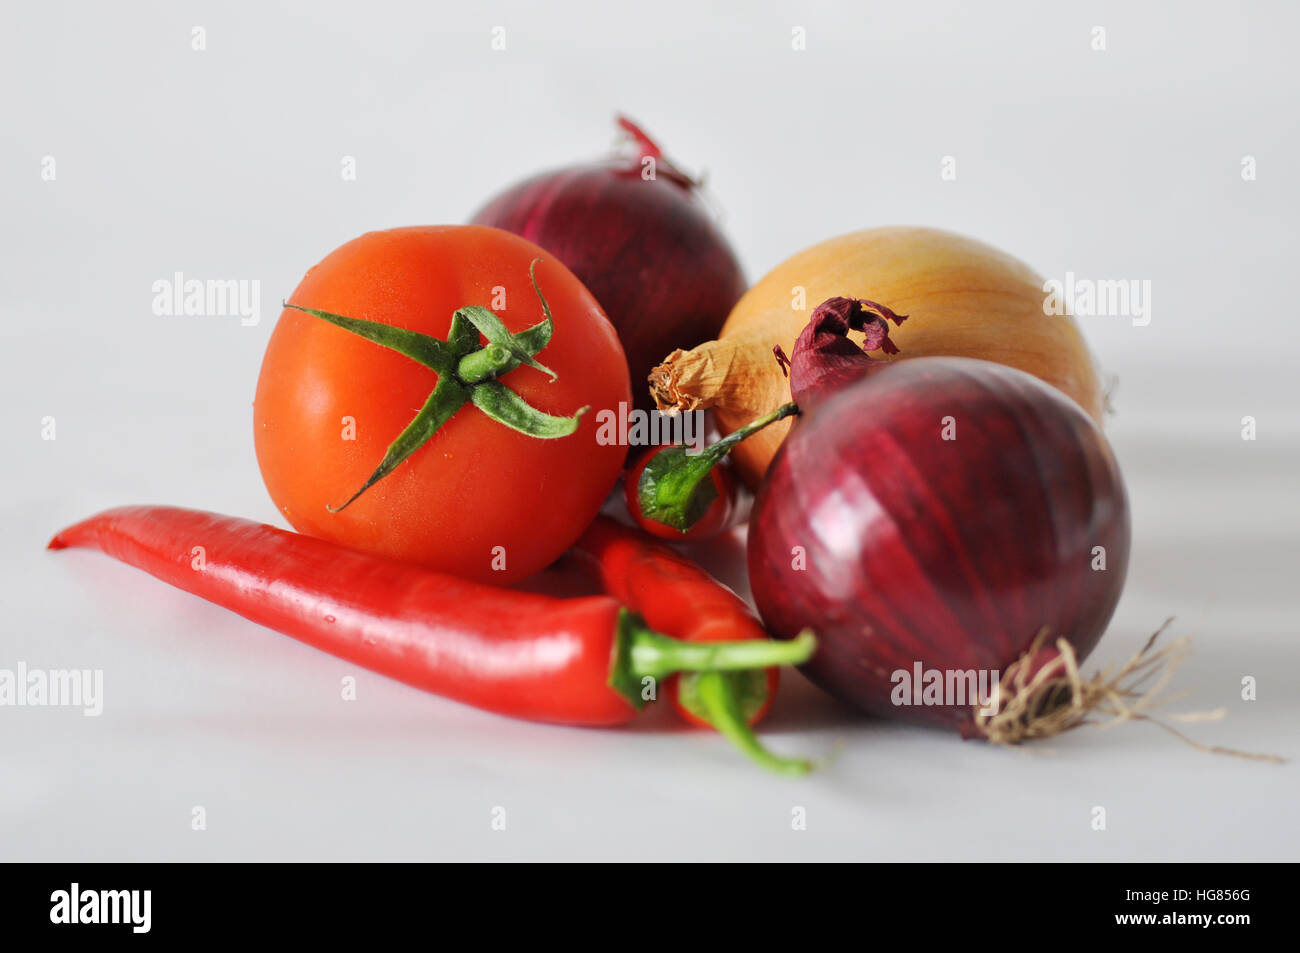 Tomato, red paper and onion on a white background close-up of the reflection Stock Photo